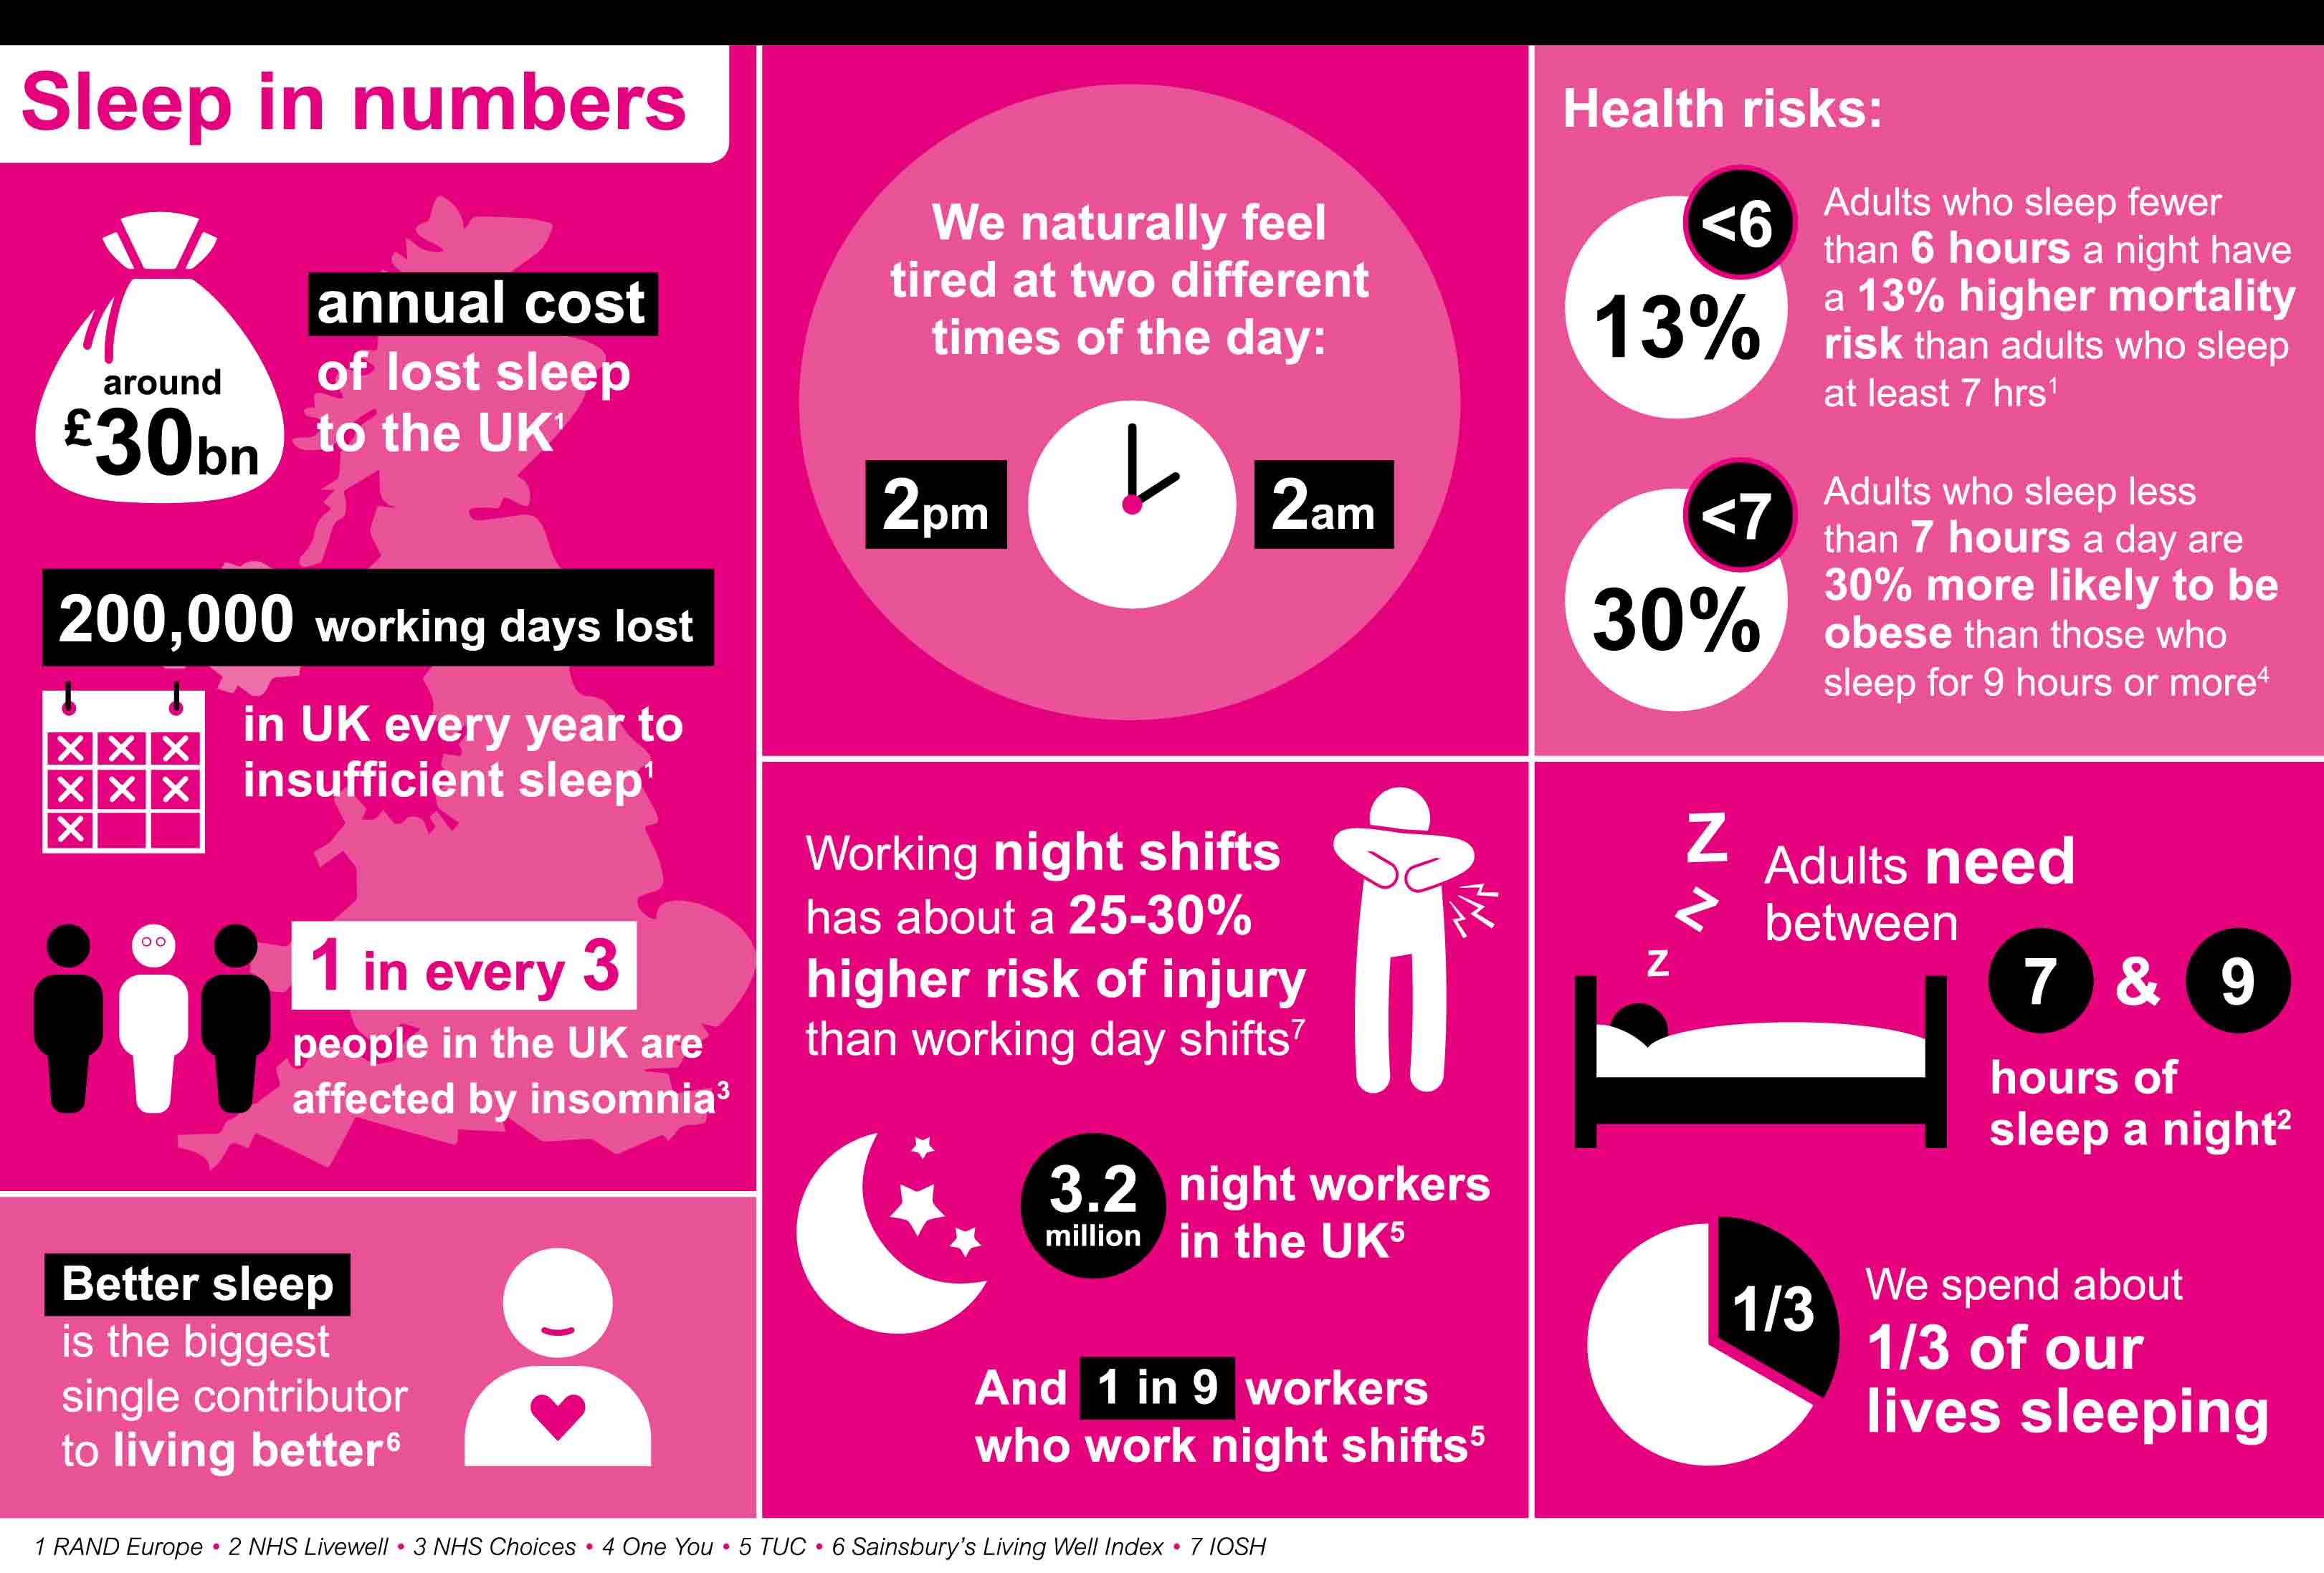 Sleep in numbers, data from the NHS